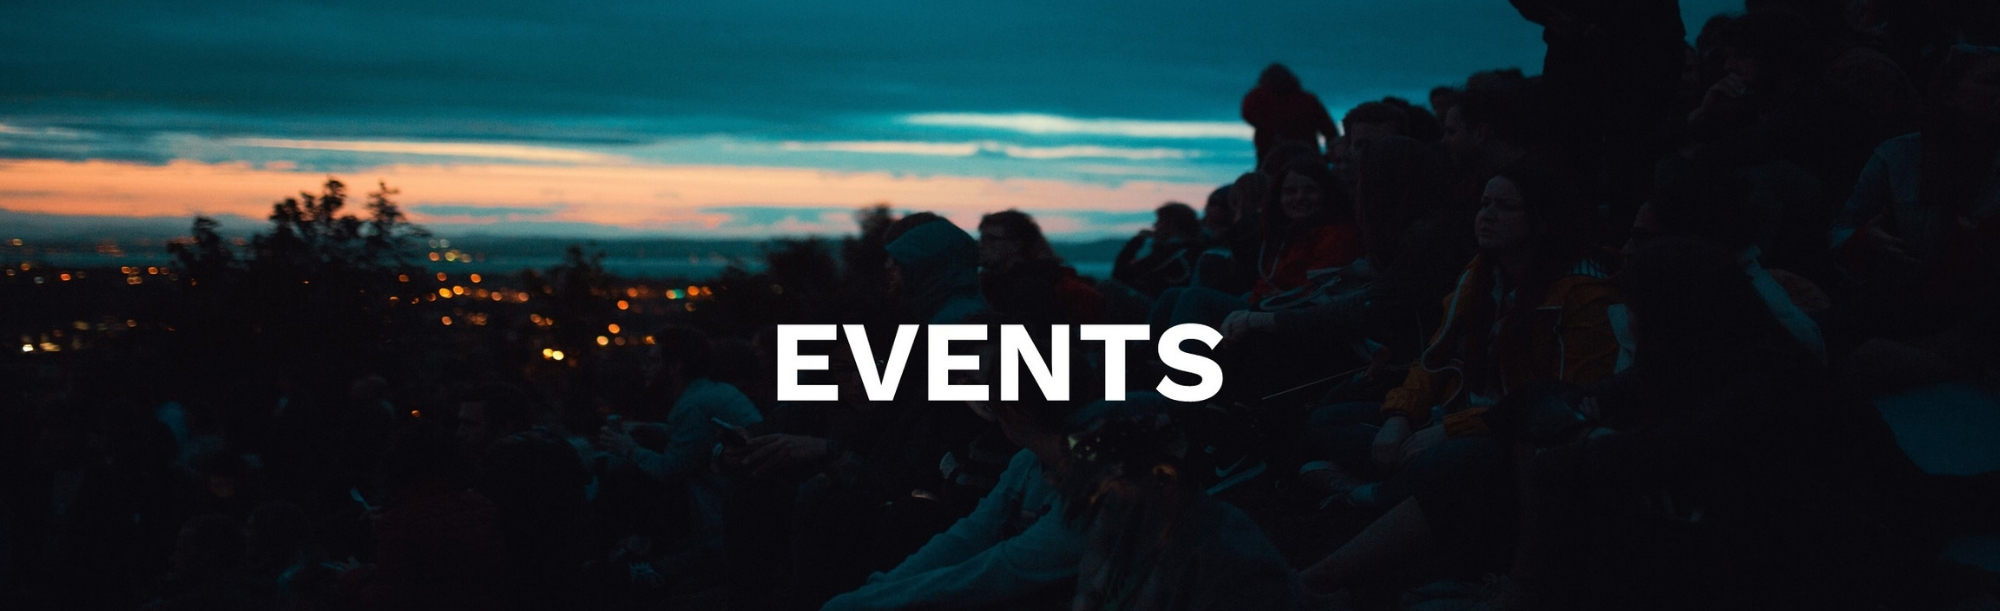 EVENTS PAGE